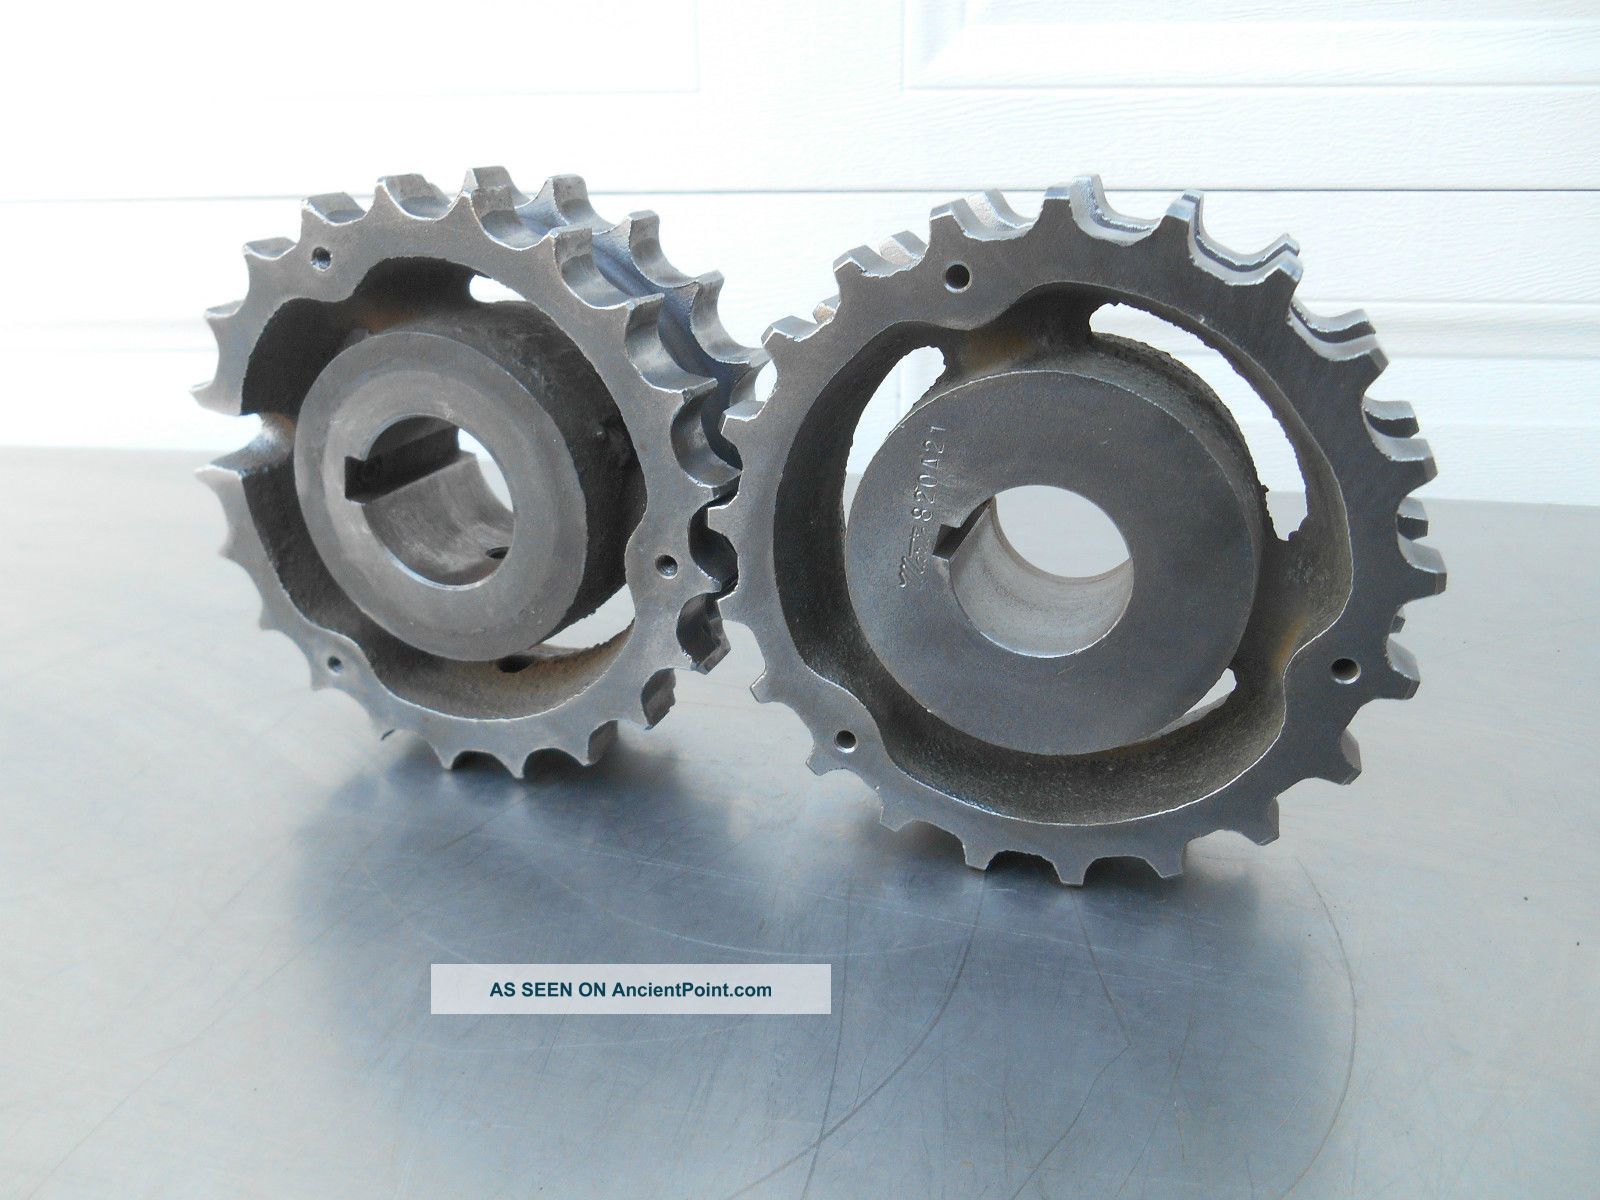 Vintage Industrial Decor Steel Cast Gear Sprockets Steampunk Martin 820a21 Other Mercantile Antiques photo